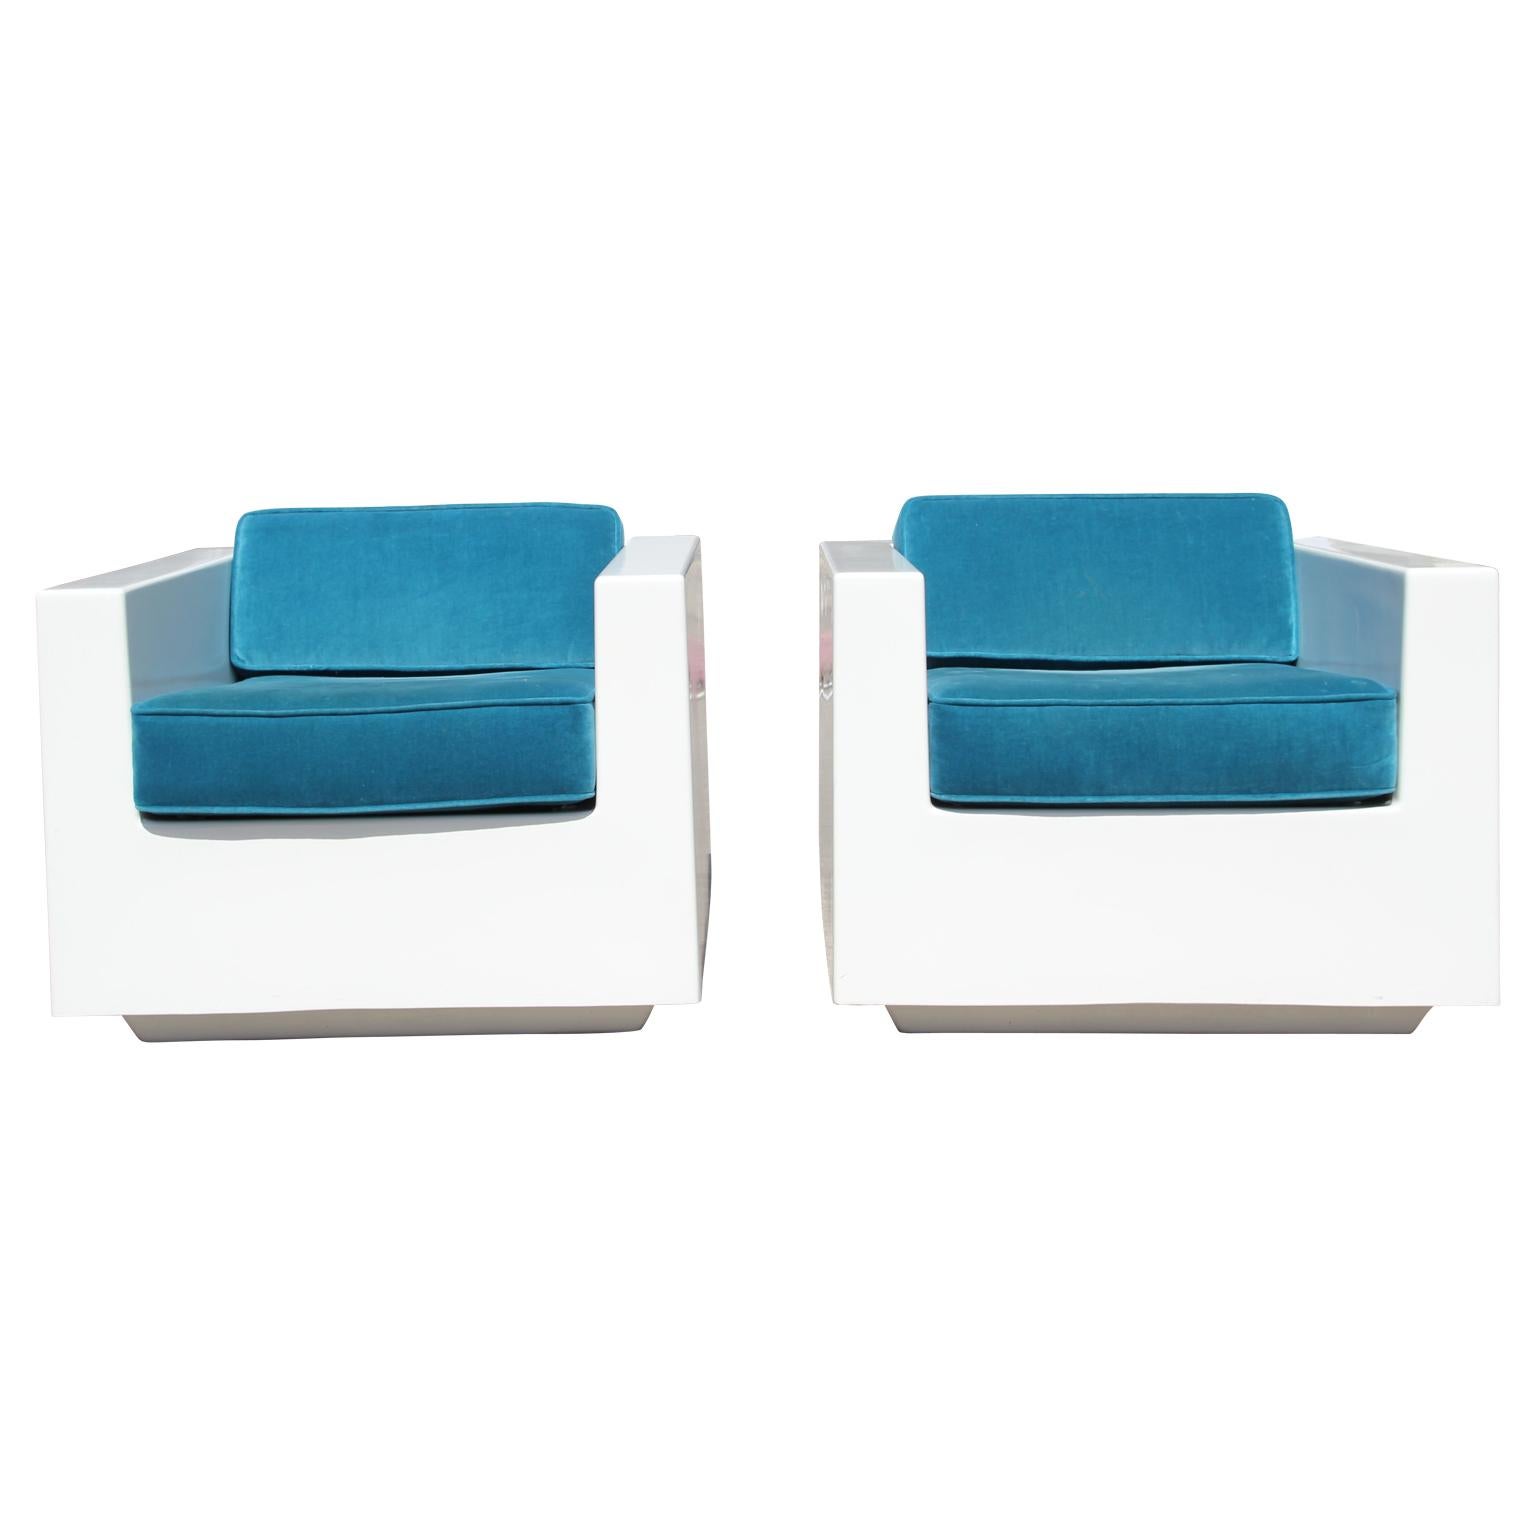 Unknown Pair of White Modern Cube Fiberglass Armchairs with Teal Velvet Seats